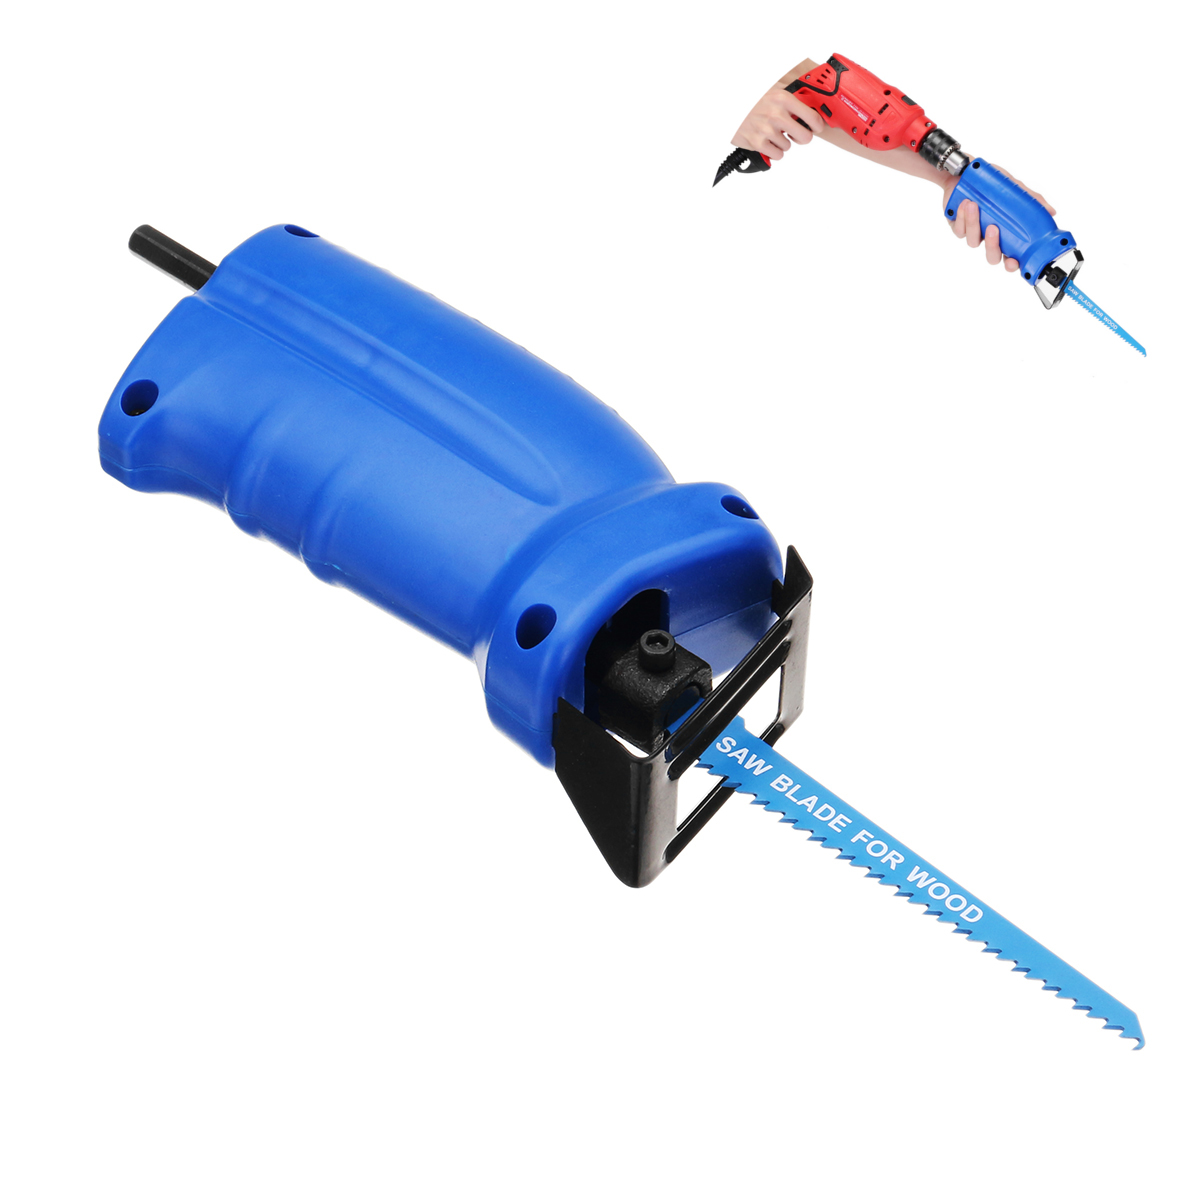 

Drillpro Portable Reciprocating Saw Adapter Set Changed Electric Drill Into Reciprocating Saw